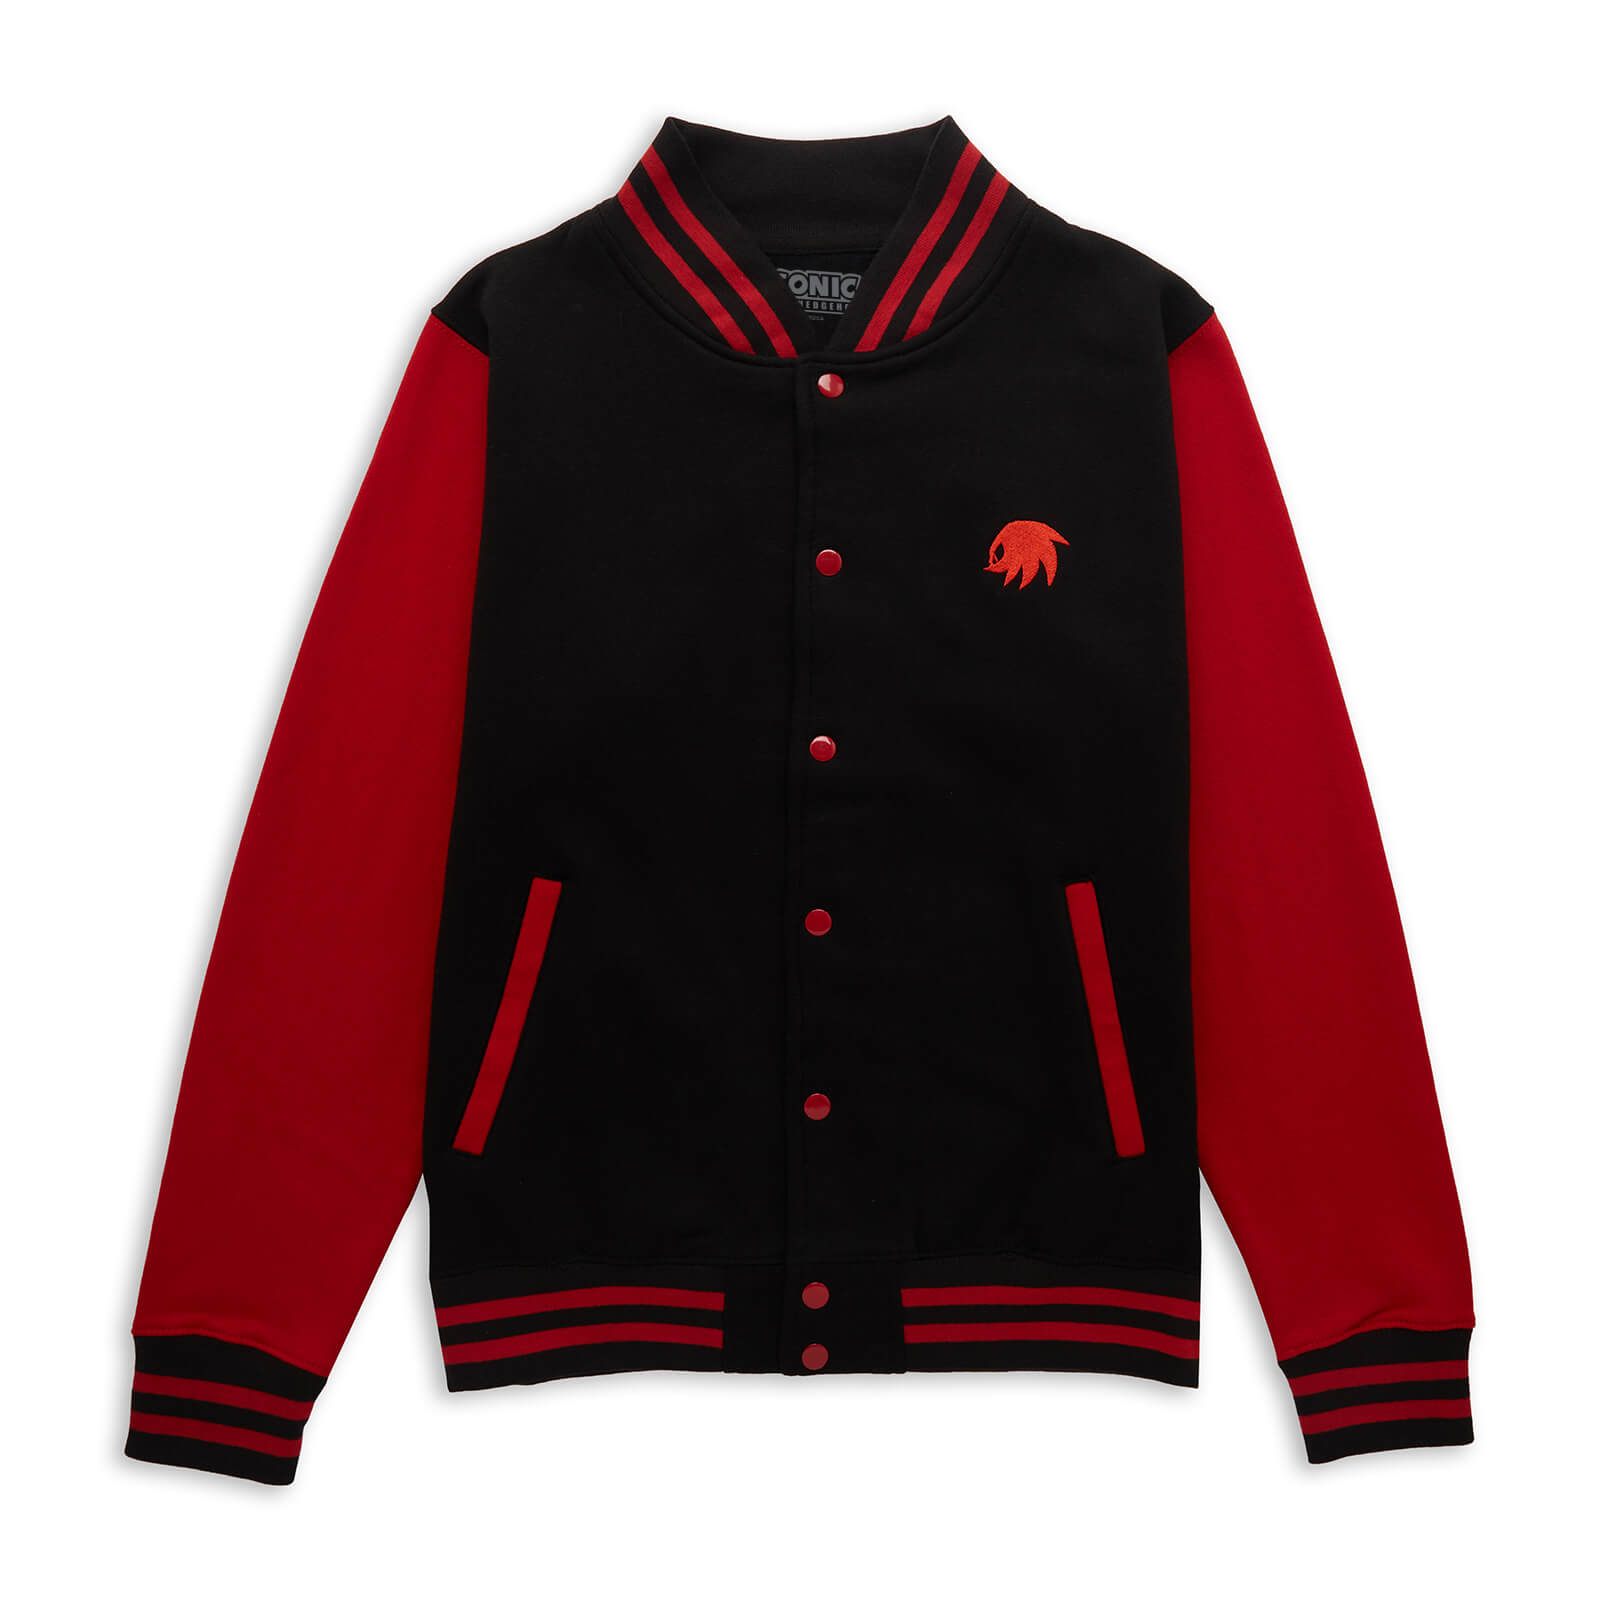 Sonic The Hedgehog Knuckles The Echidna Embroidered Varsity Jacket - Black/Red - S